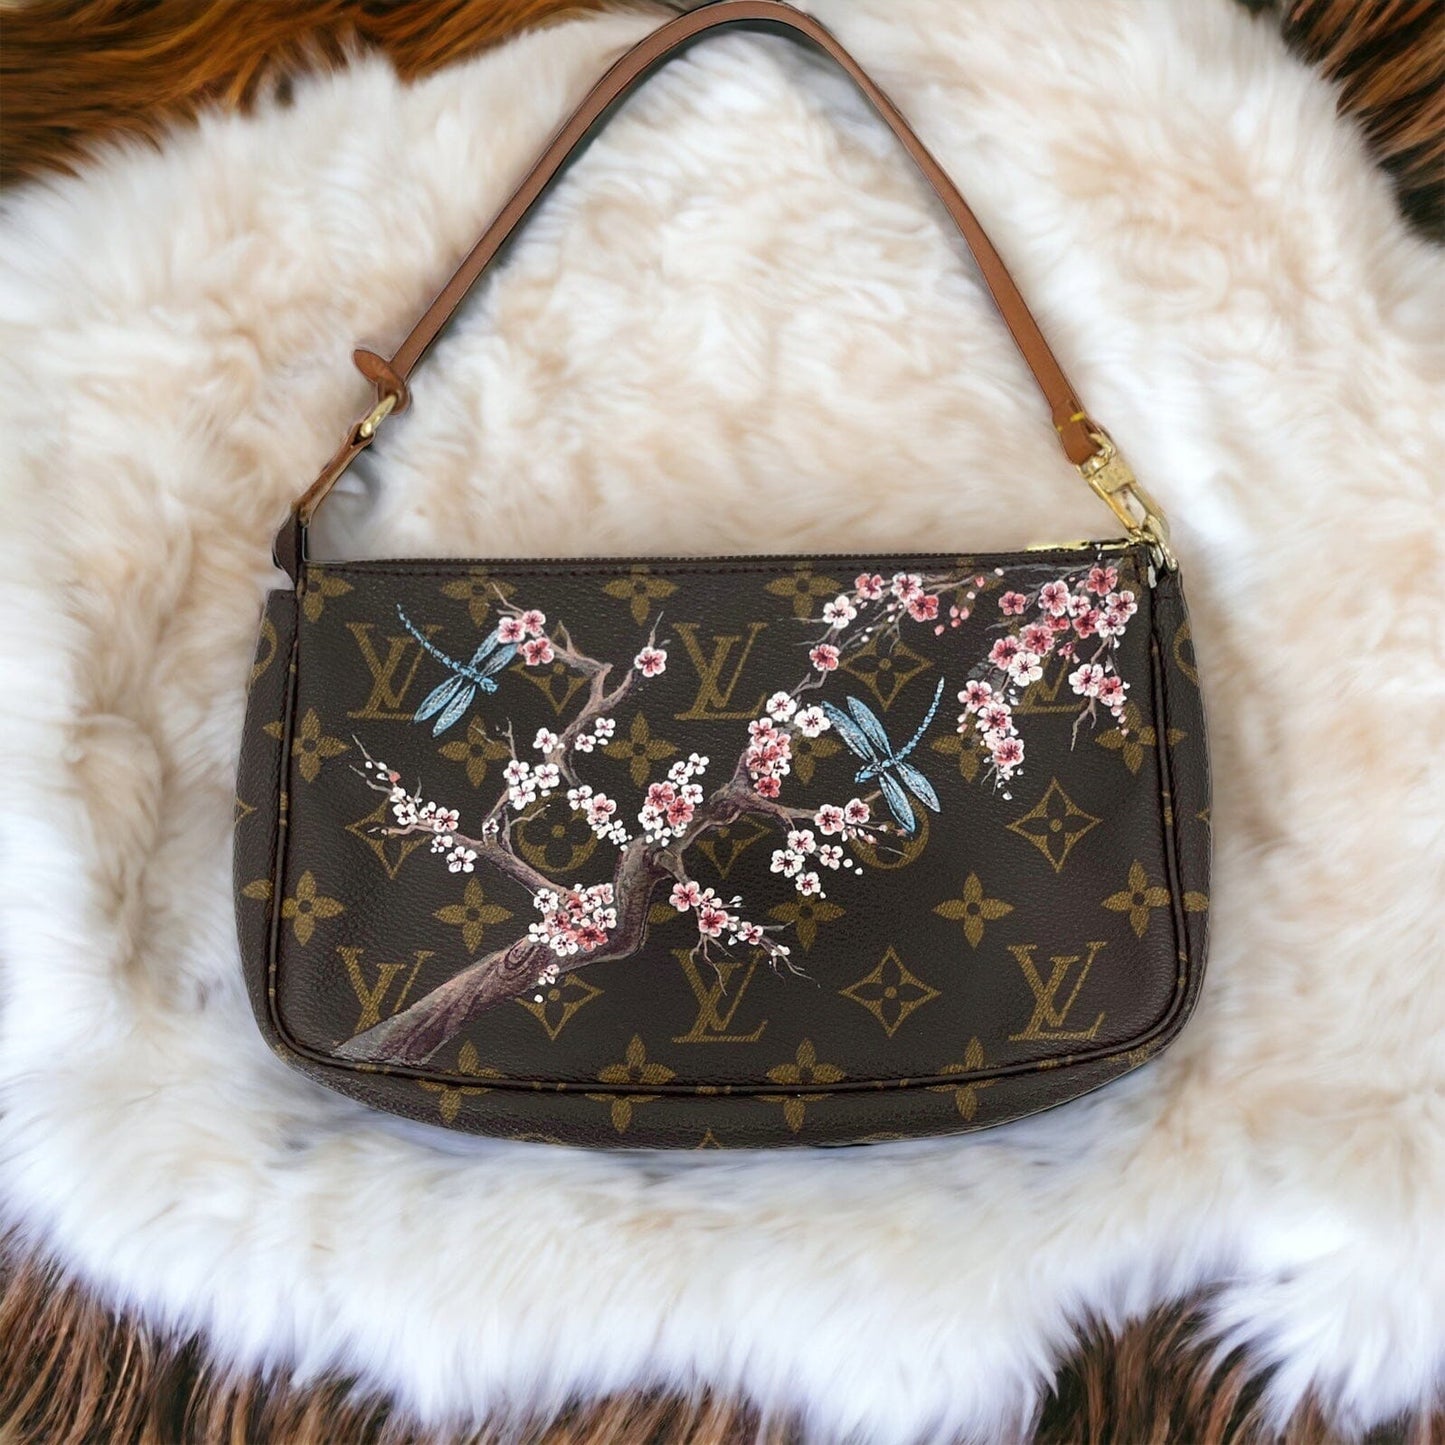 Louis Vuitton newest handbag will bring back memories of your childhood